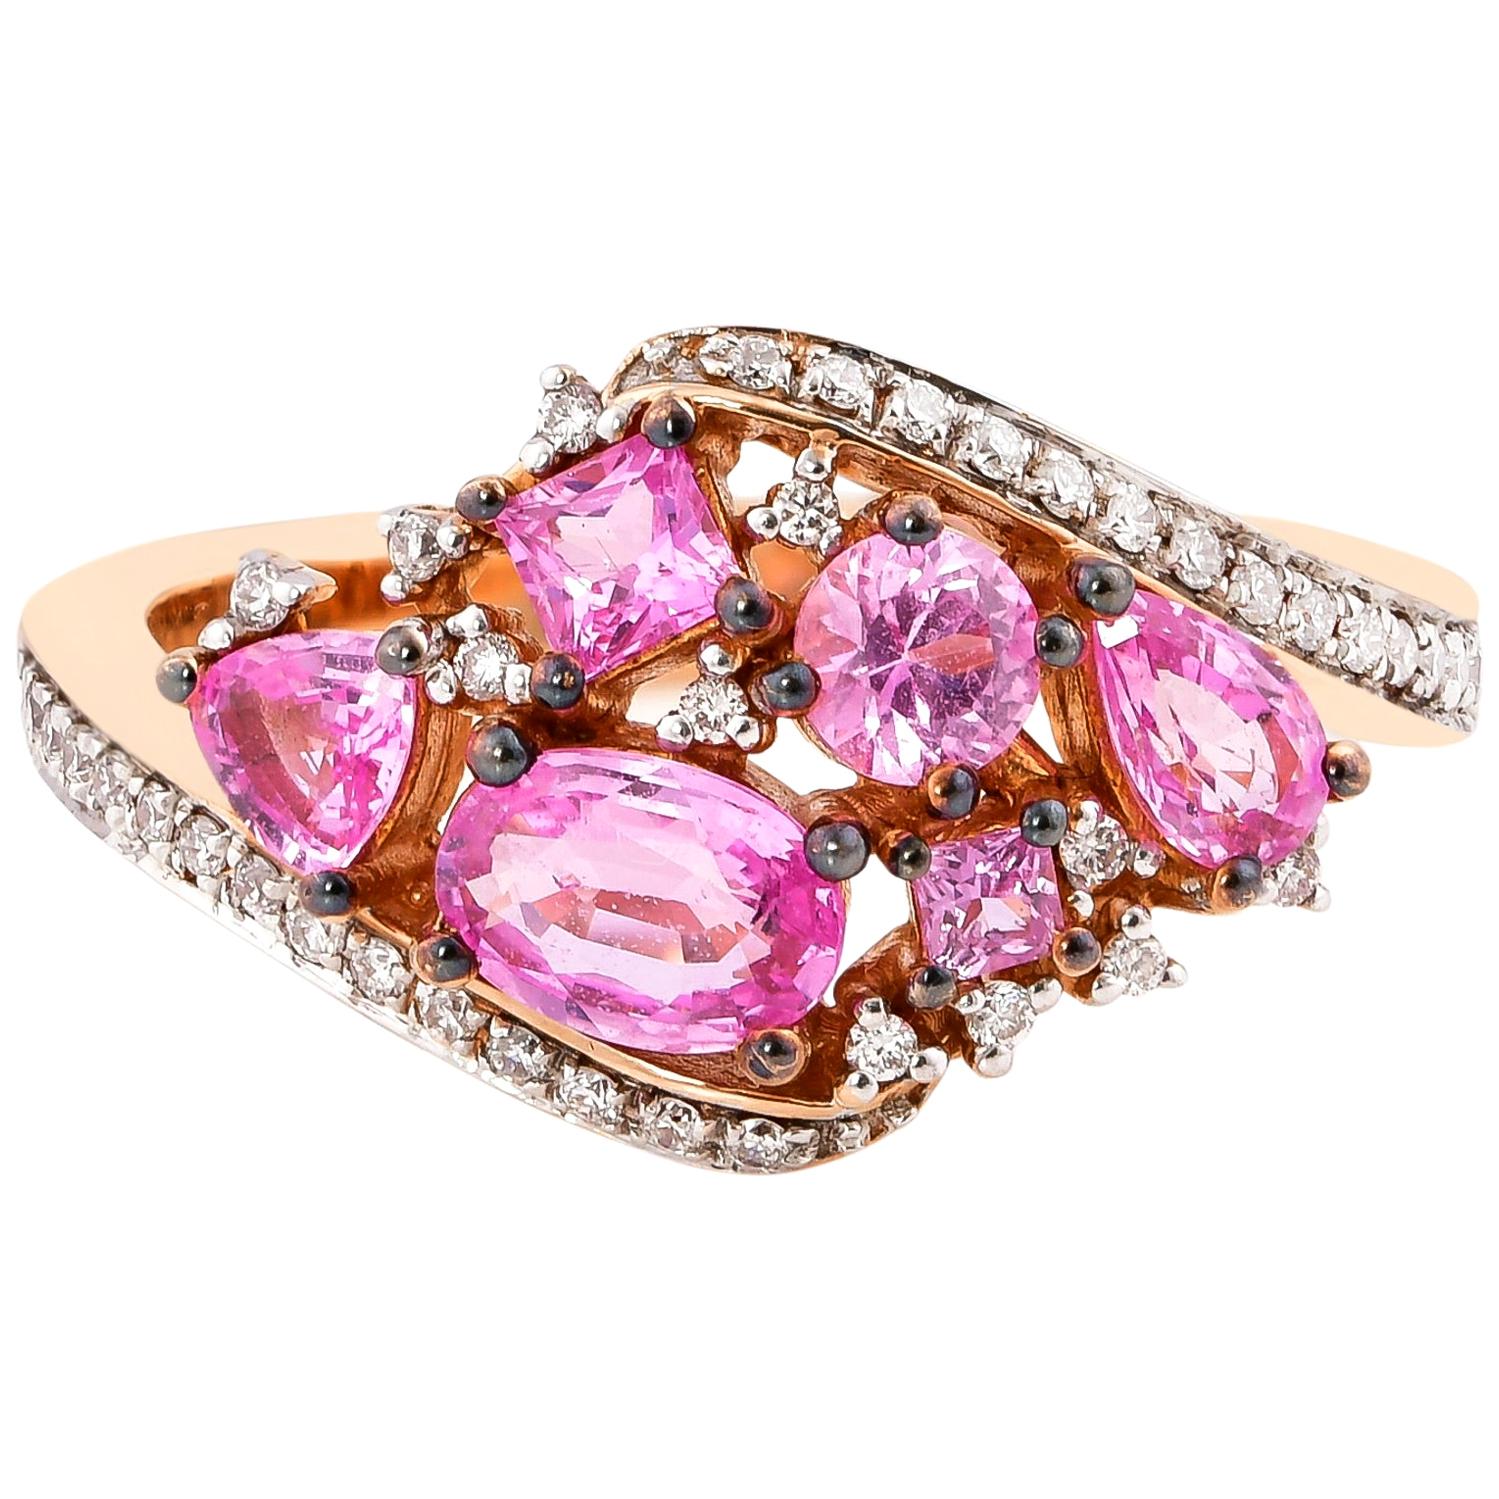 1.4 Carat Pink Sapphire Ring in 18 Karat Rose Gold with Diamond For Sale